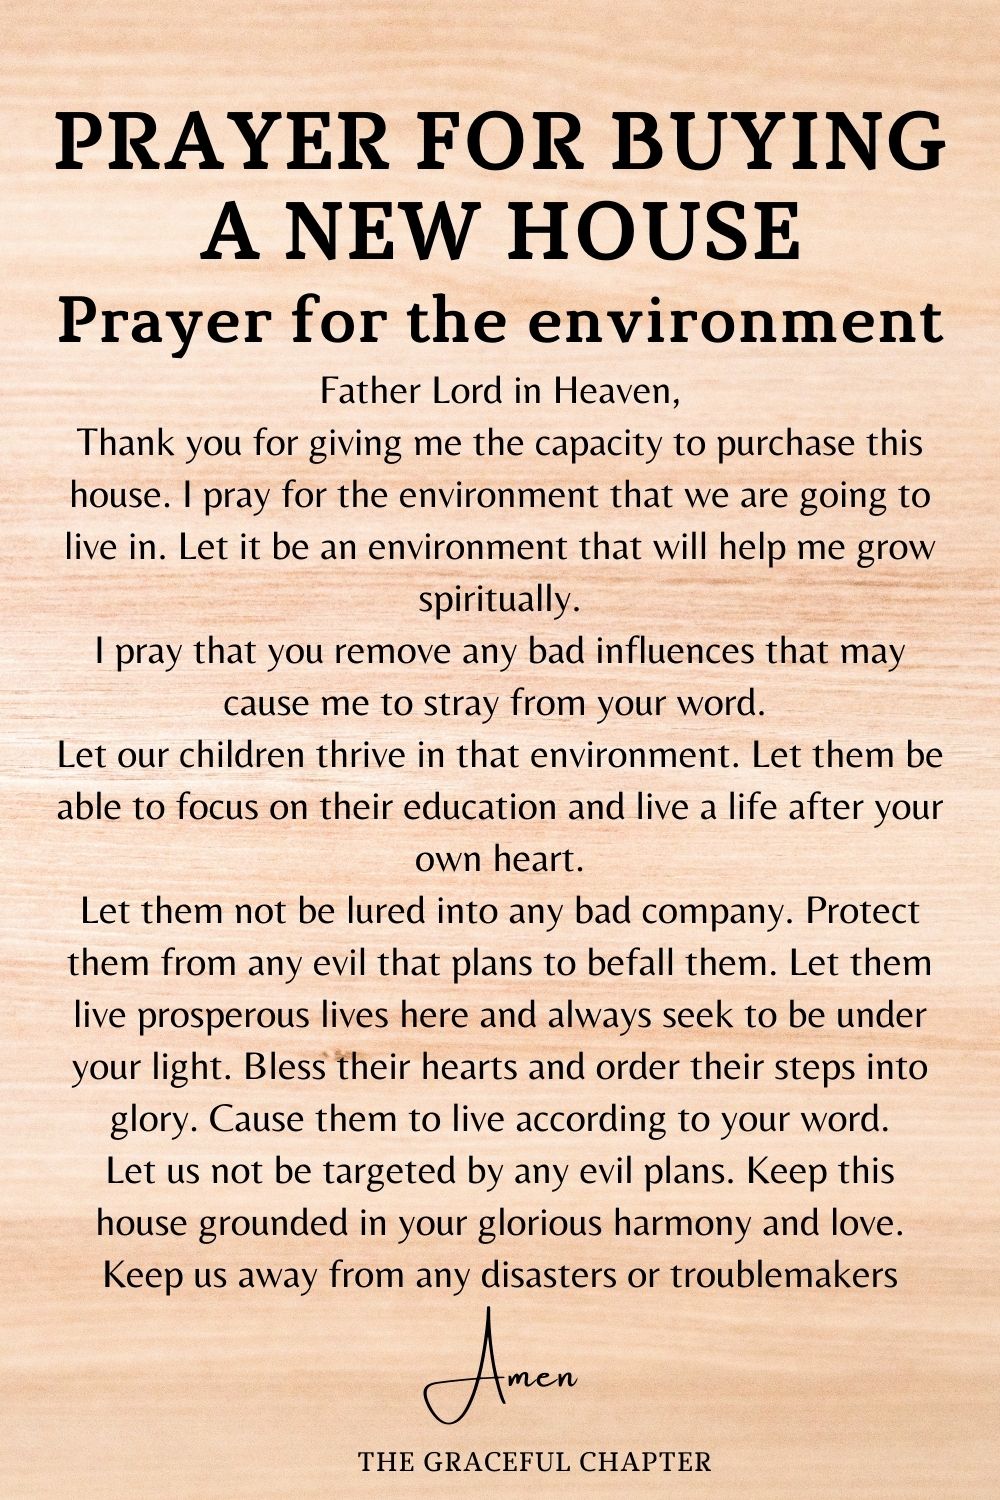 prayers for buying a new house- Prayer for the environment